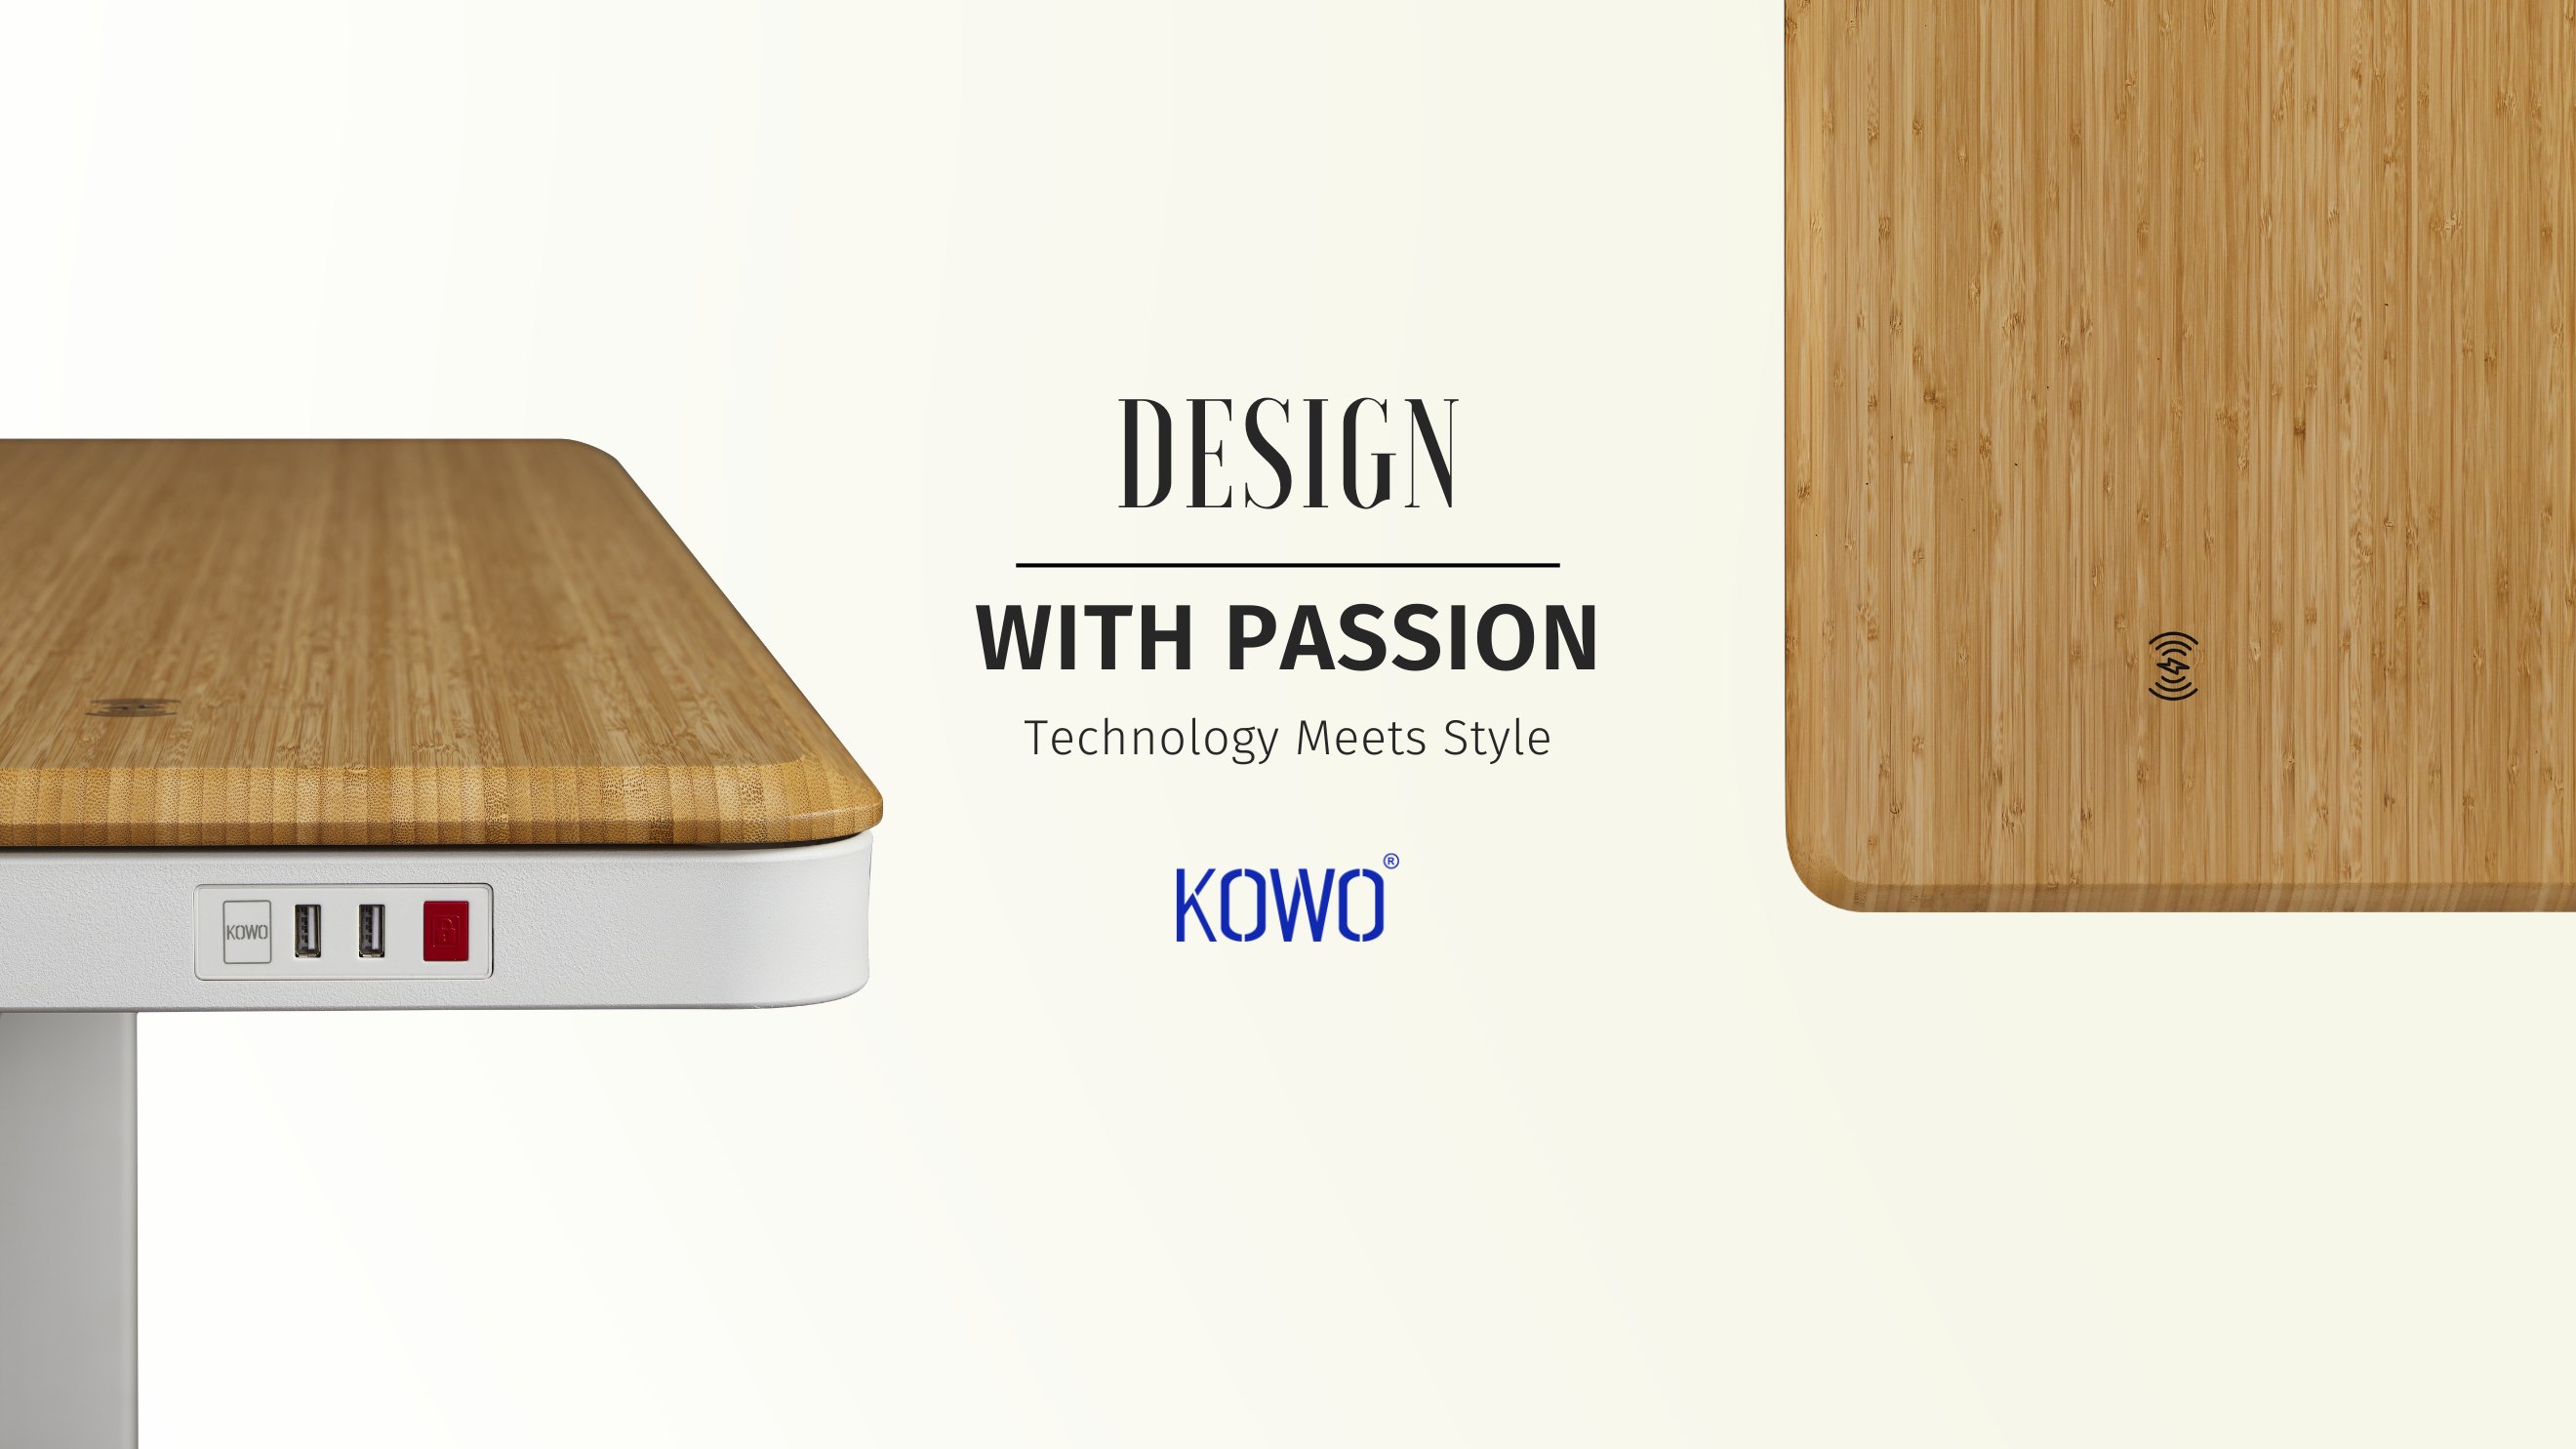 KOWO design our standing desk with passion